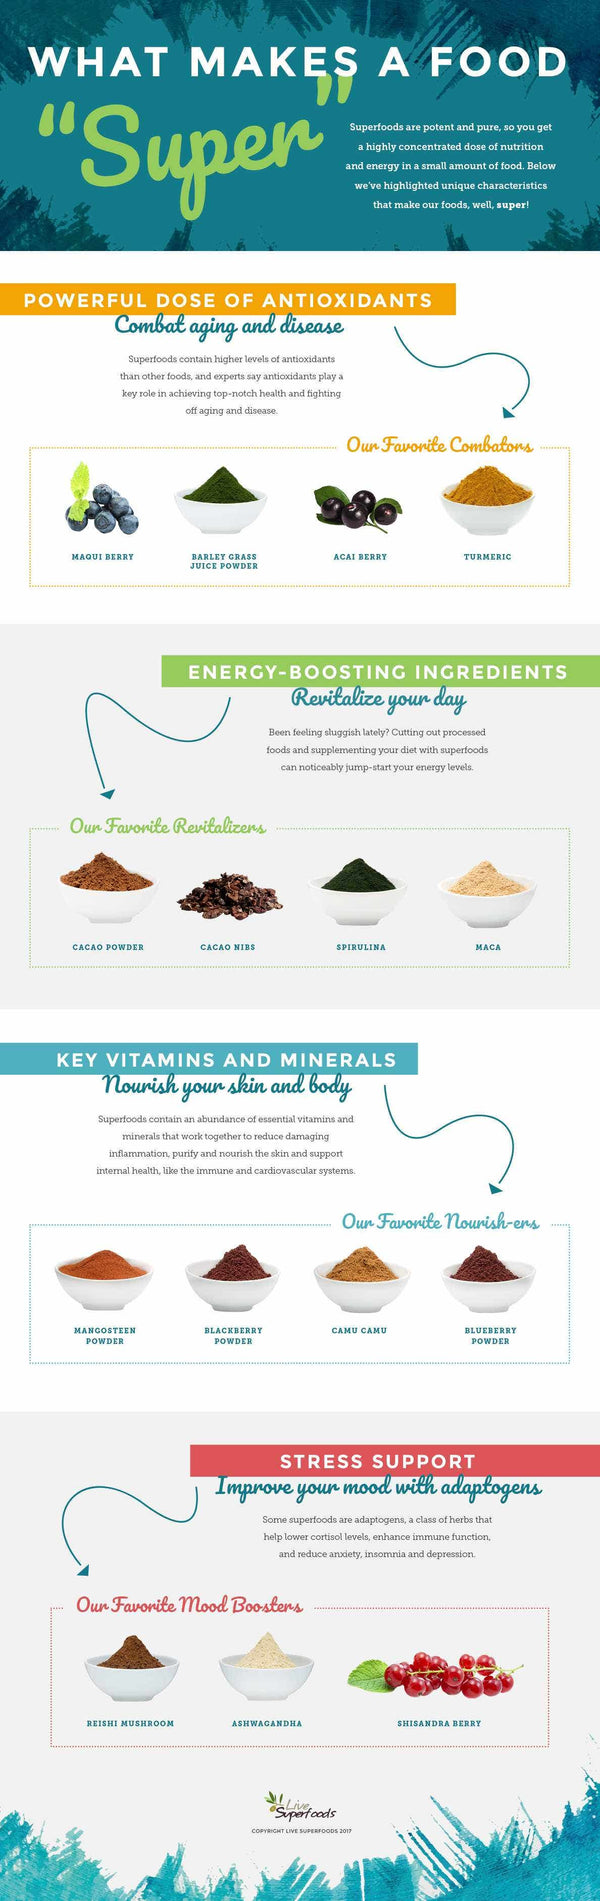 What Makes Superfoods So "Super"? {Infographic}